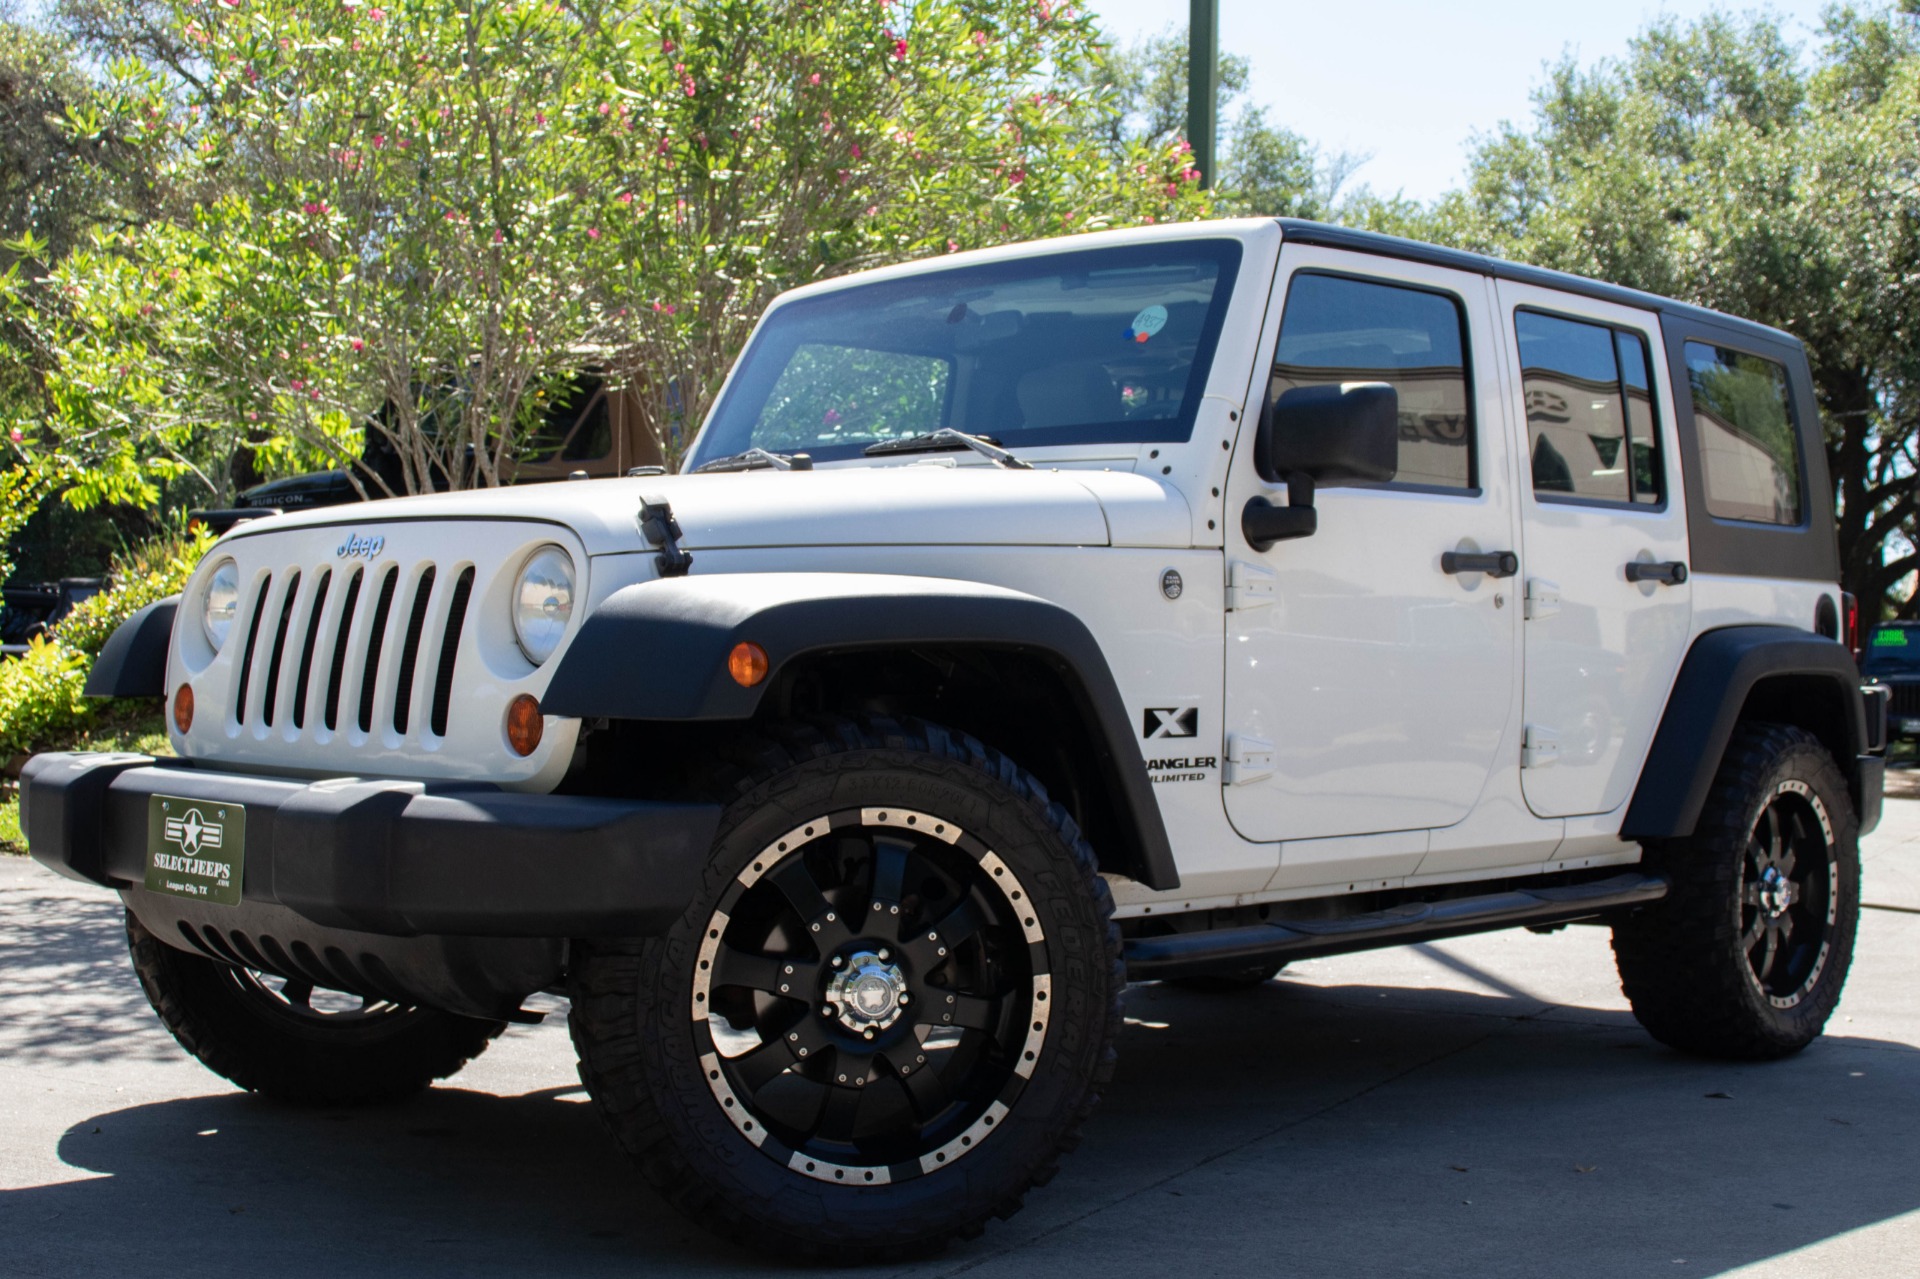 Used 2009 Jeep Wrangler Unlimited X  For Sale 21 995 